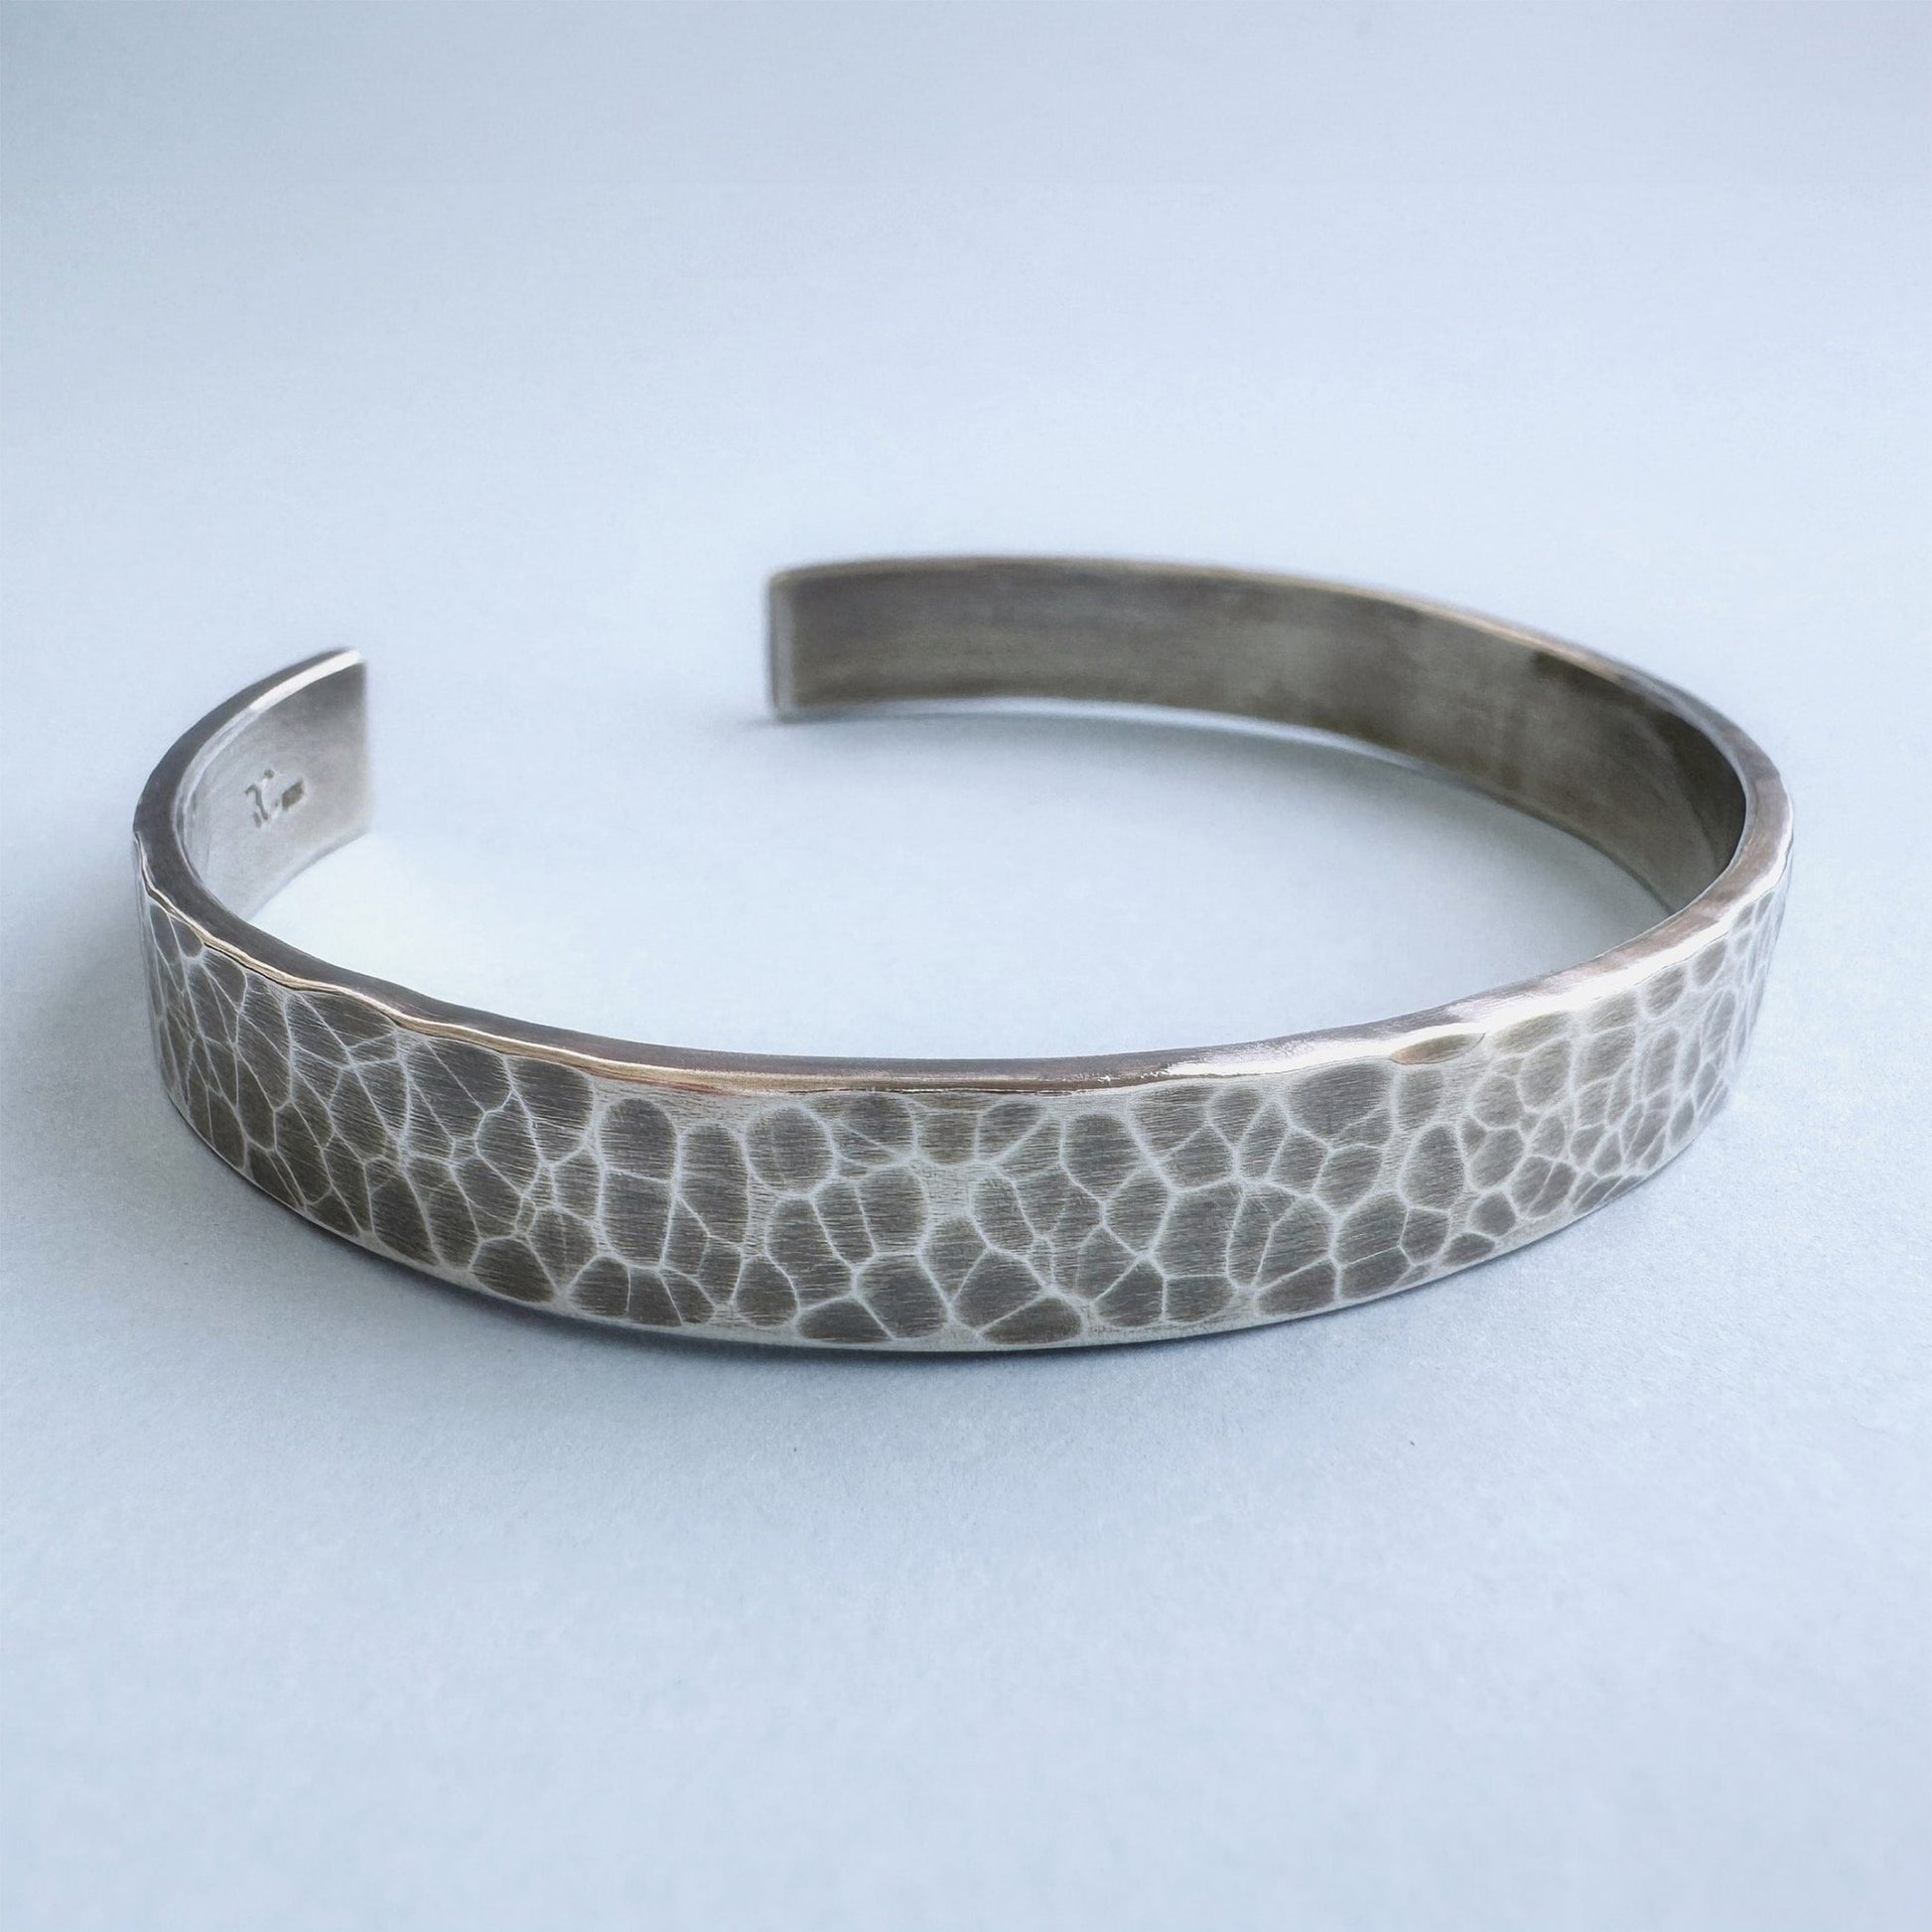 A heavy, hammered/beaten sterling silver cuff bracelet with a blackened finish is lying on a pale blue background.